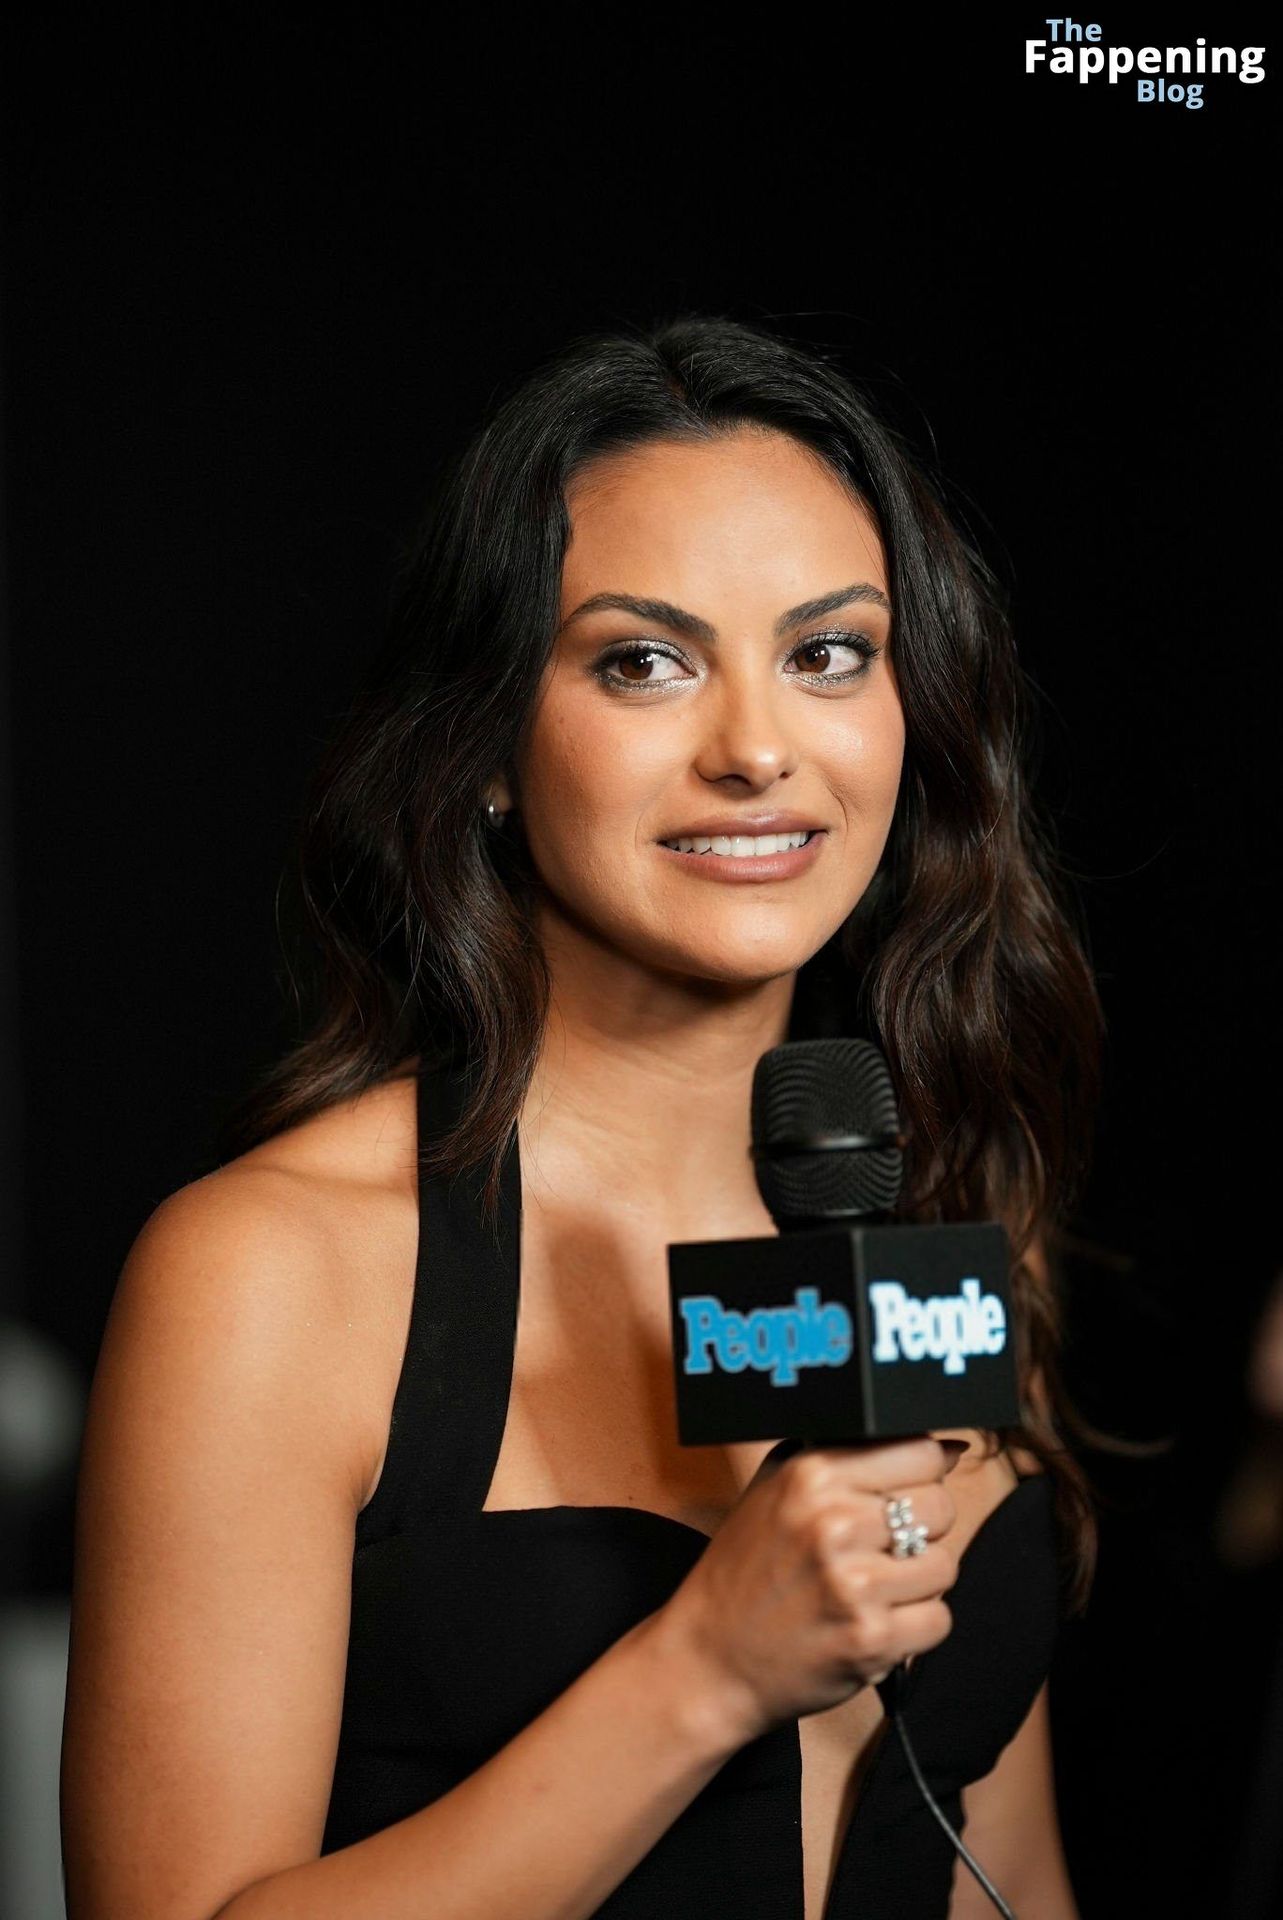 camila-mendes-upgraded-screening-cleavage-low-cut-dress-14-thefappeningblog.com_.jpg